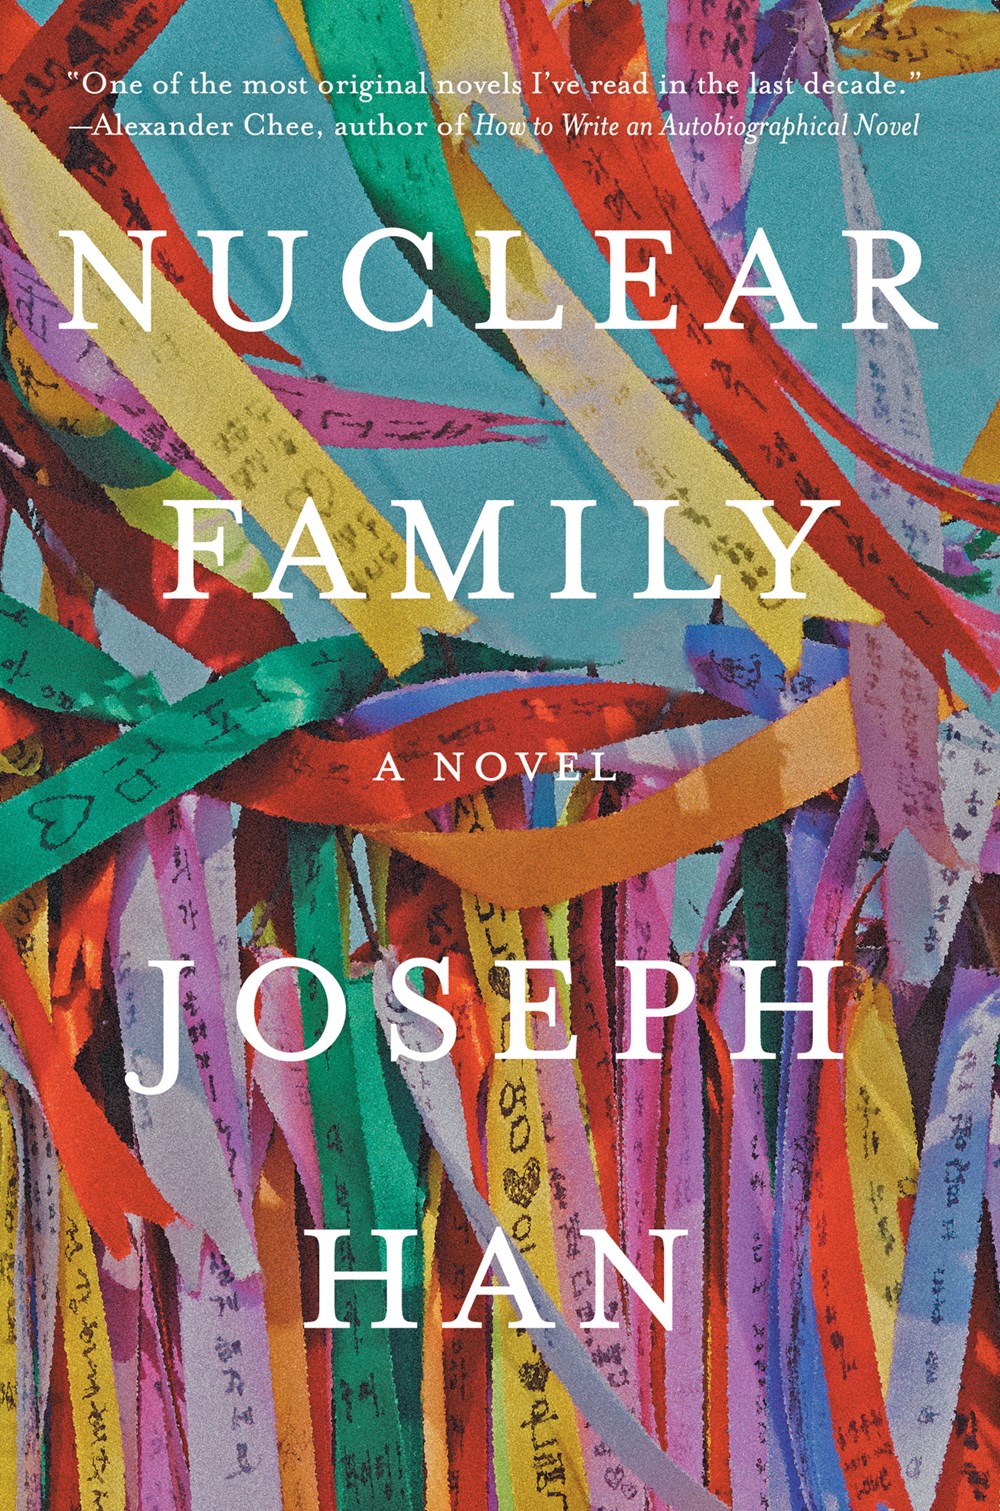 Image for "Nuclear Family"